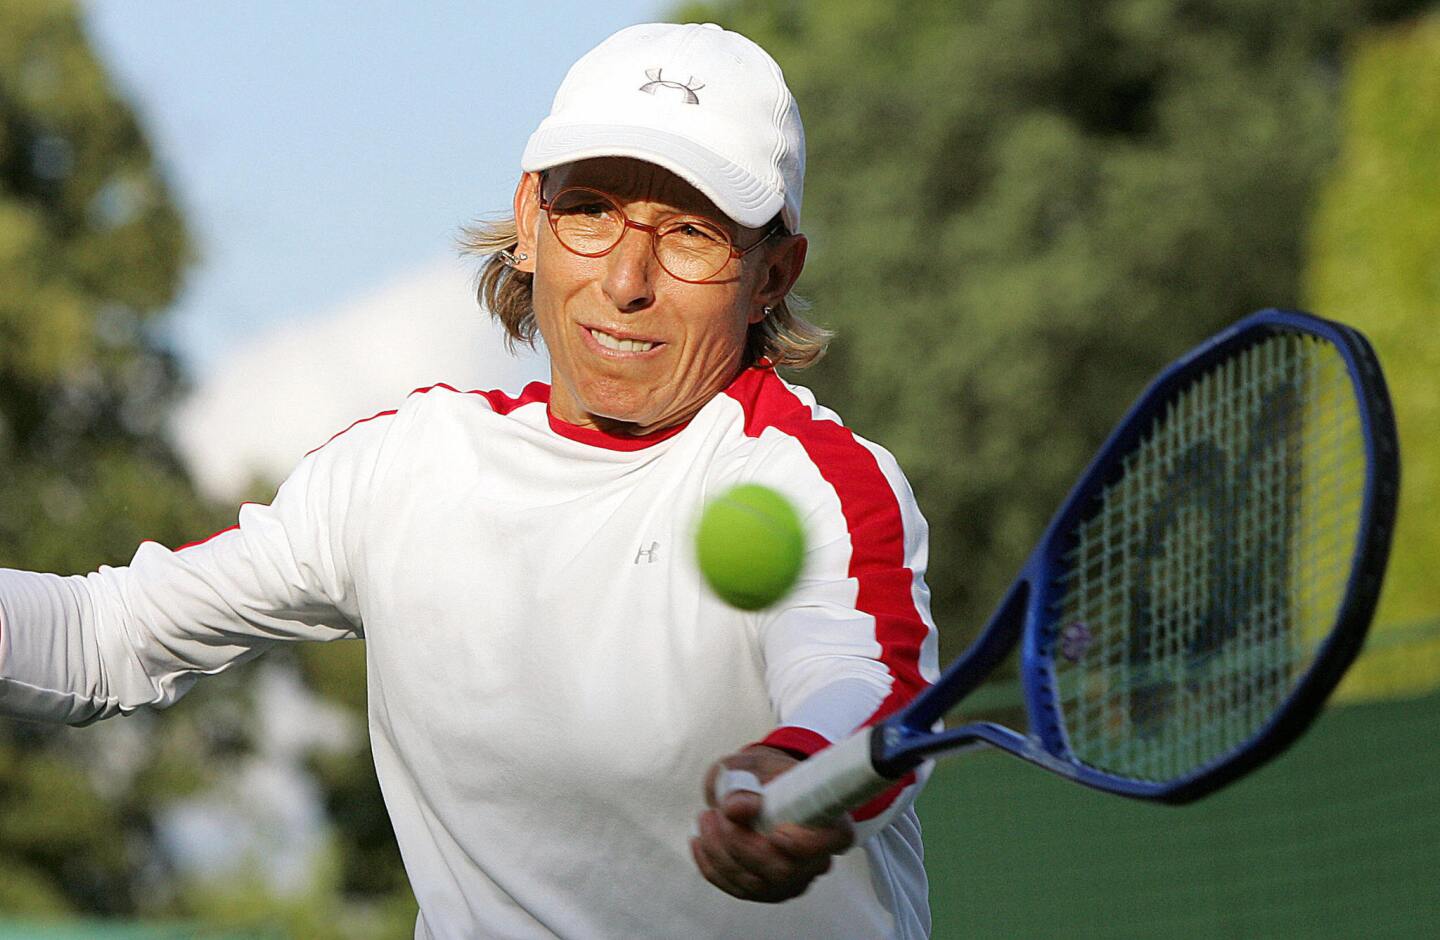 Navratilova dominated women's tennis during her career, winning the women's singles title at Wimbledon a record nine times. She is 55 today.